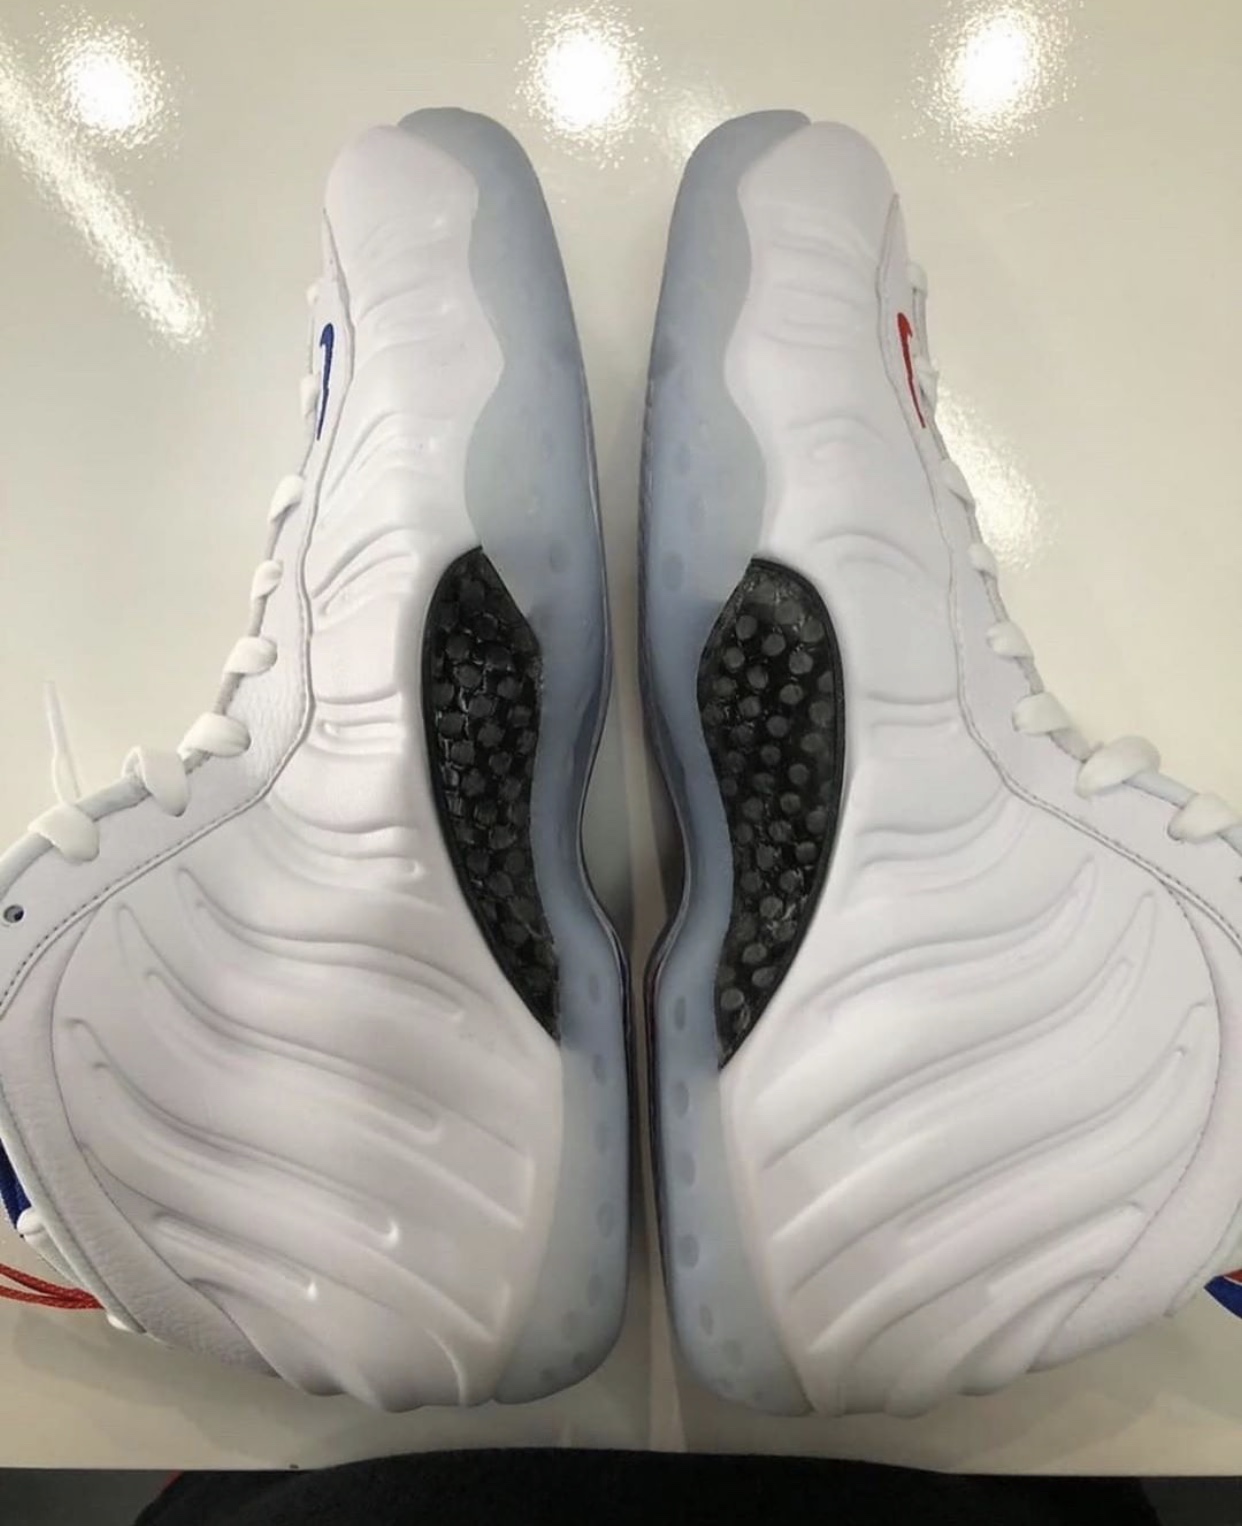 First Look: Nike Air Foamposite One 